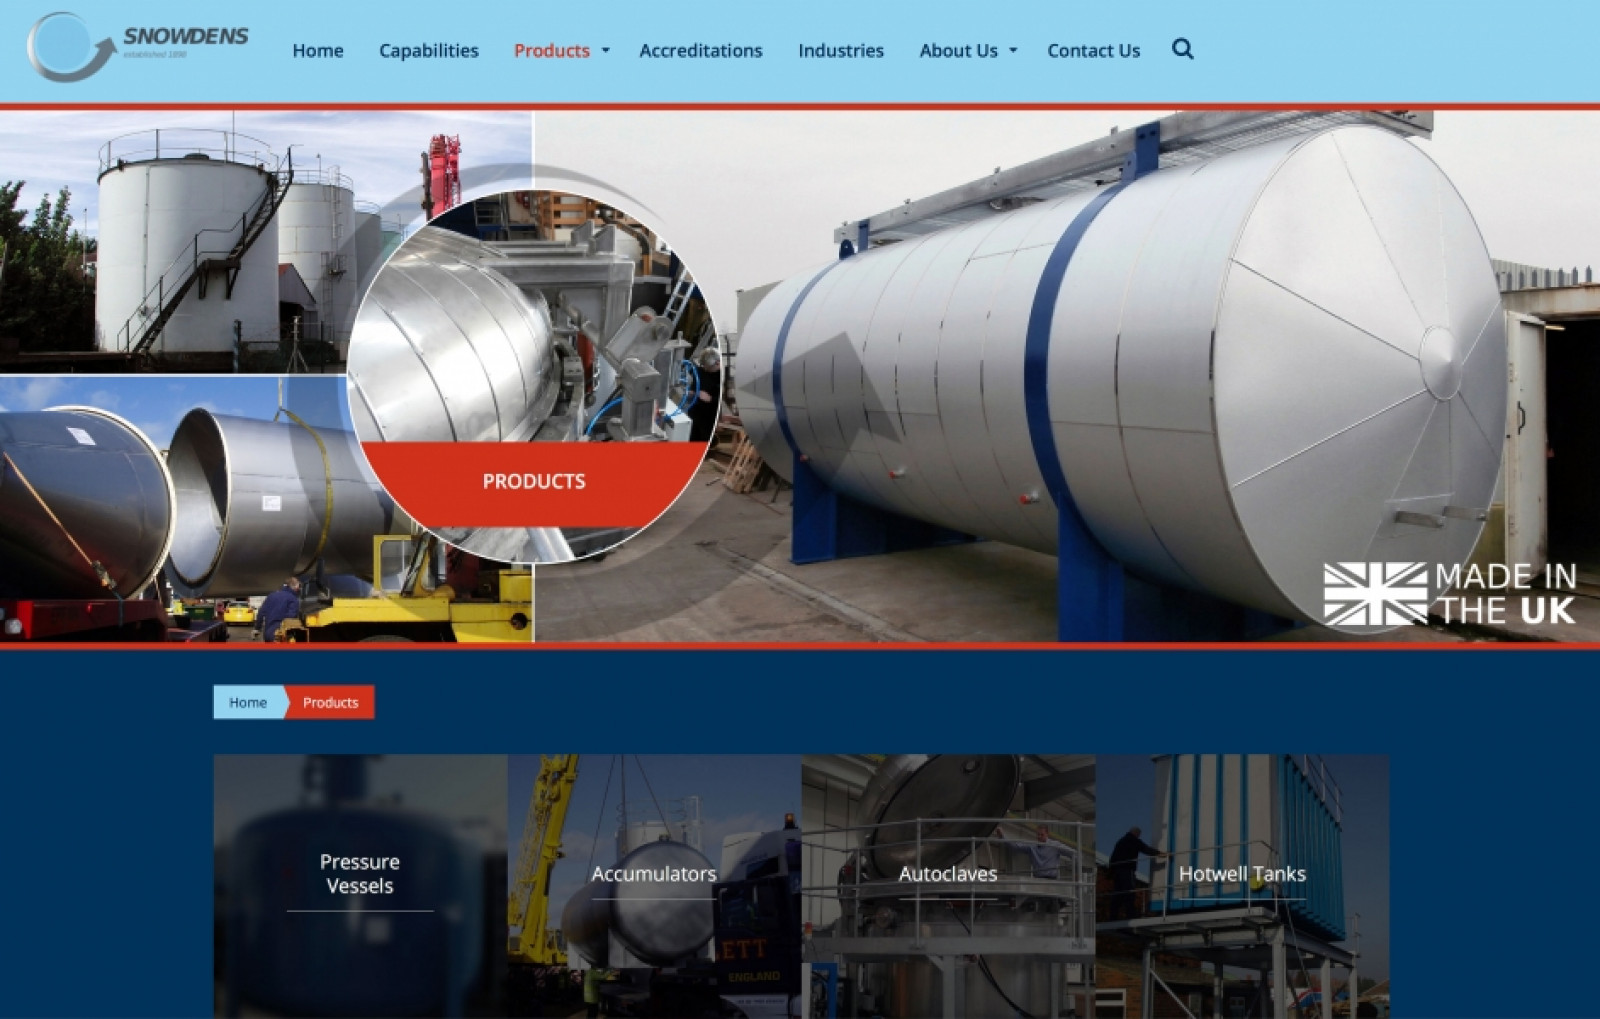 LAUNCH OF SNOWDENS NEW FABRICATION WEBSITE